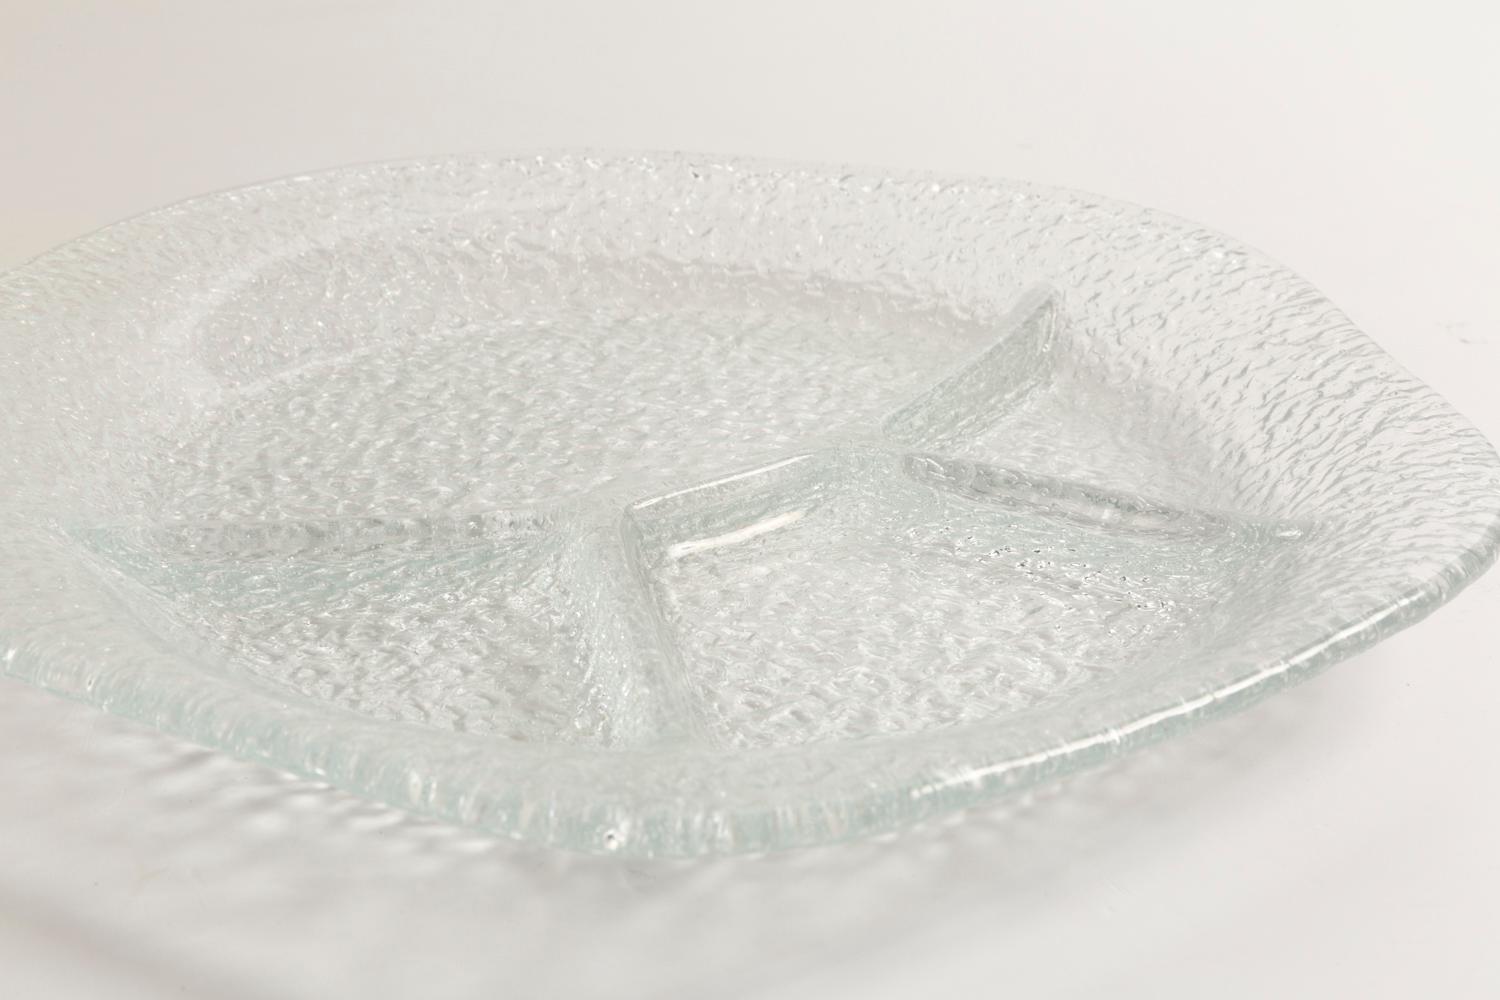 Midcentury Vintage Decorative Glass Plate, Italy, 1960s For Sale 2